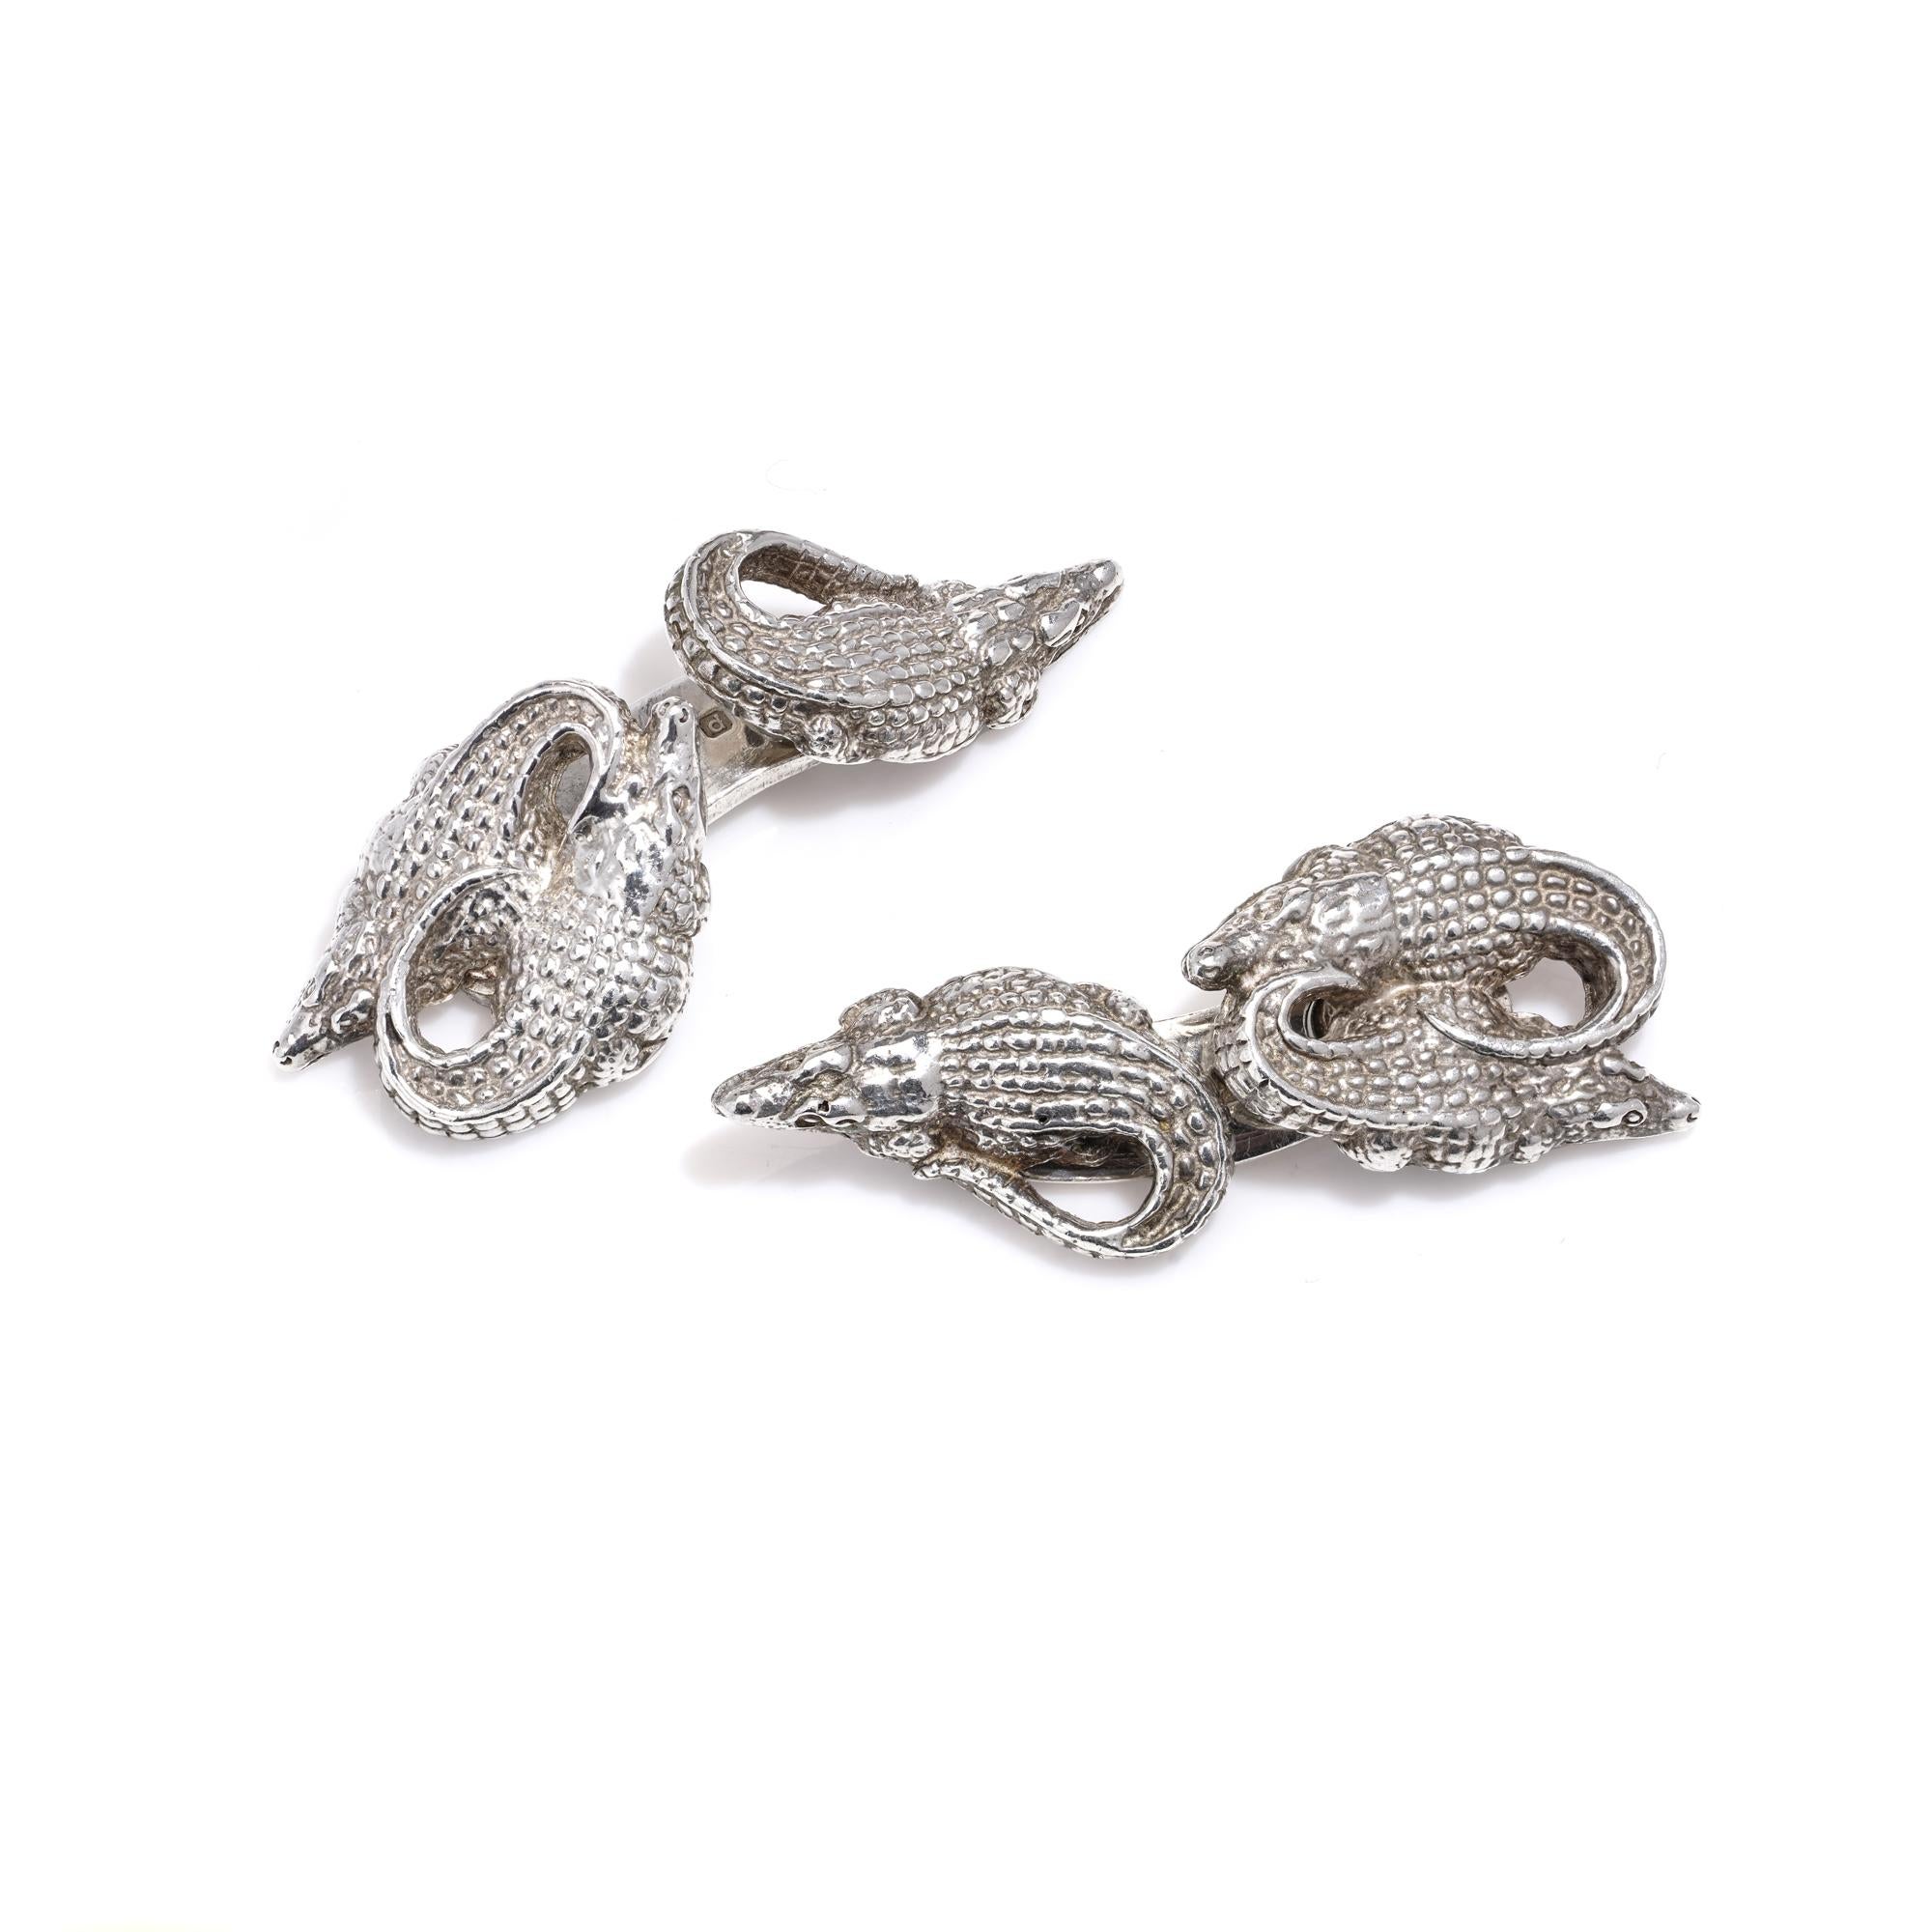 Patrick Mavros Pair of Silver Nile Crocodile Cufflinks In Excellent Condition For Sale In Braintree, GB